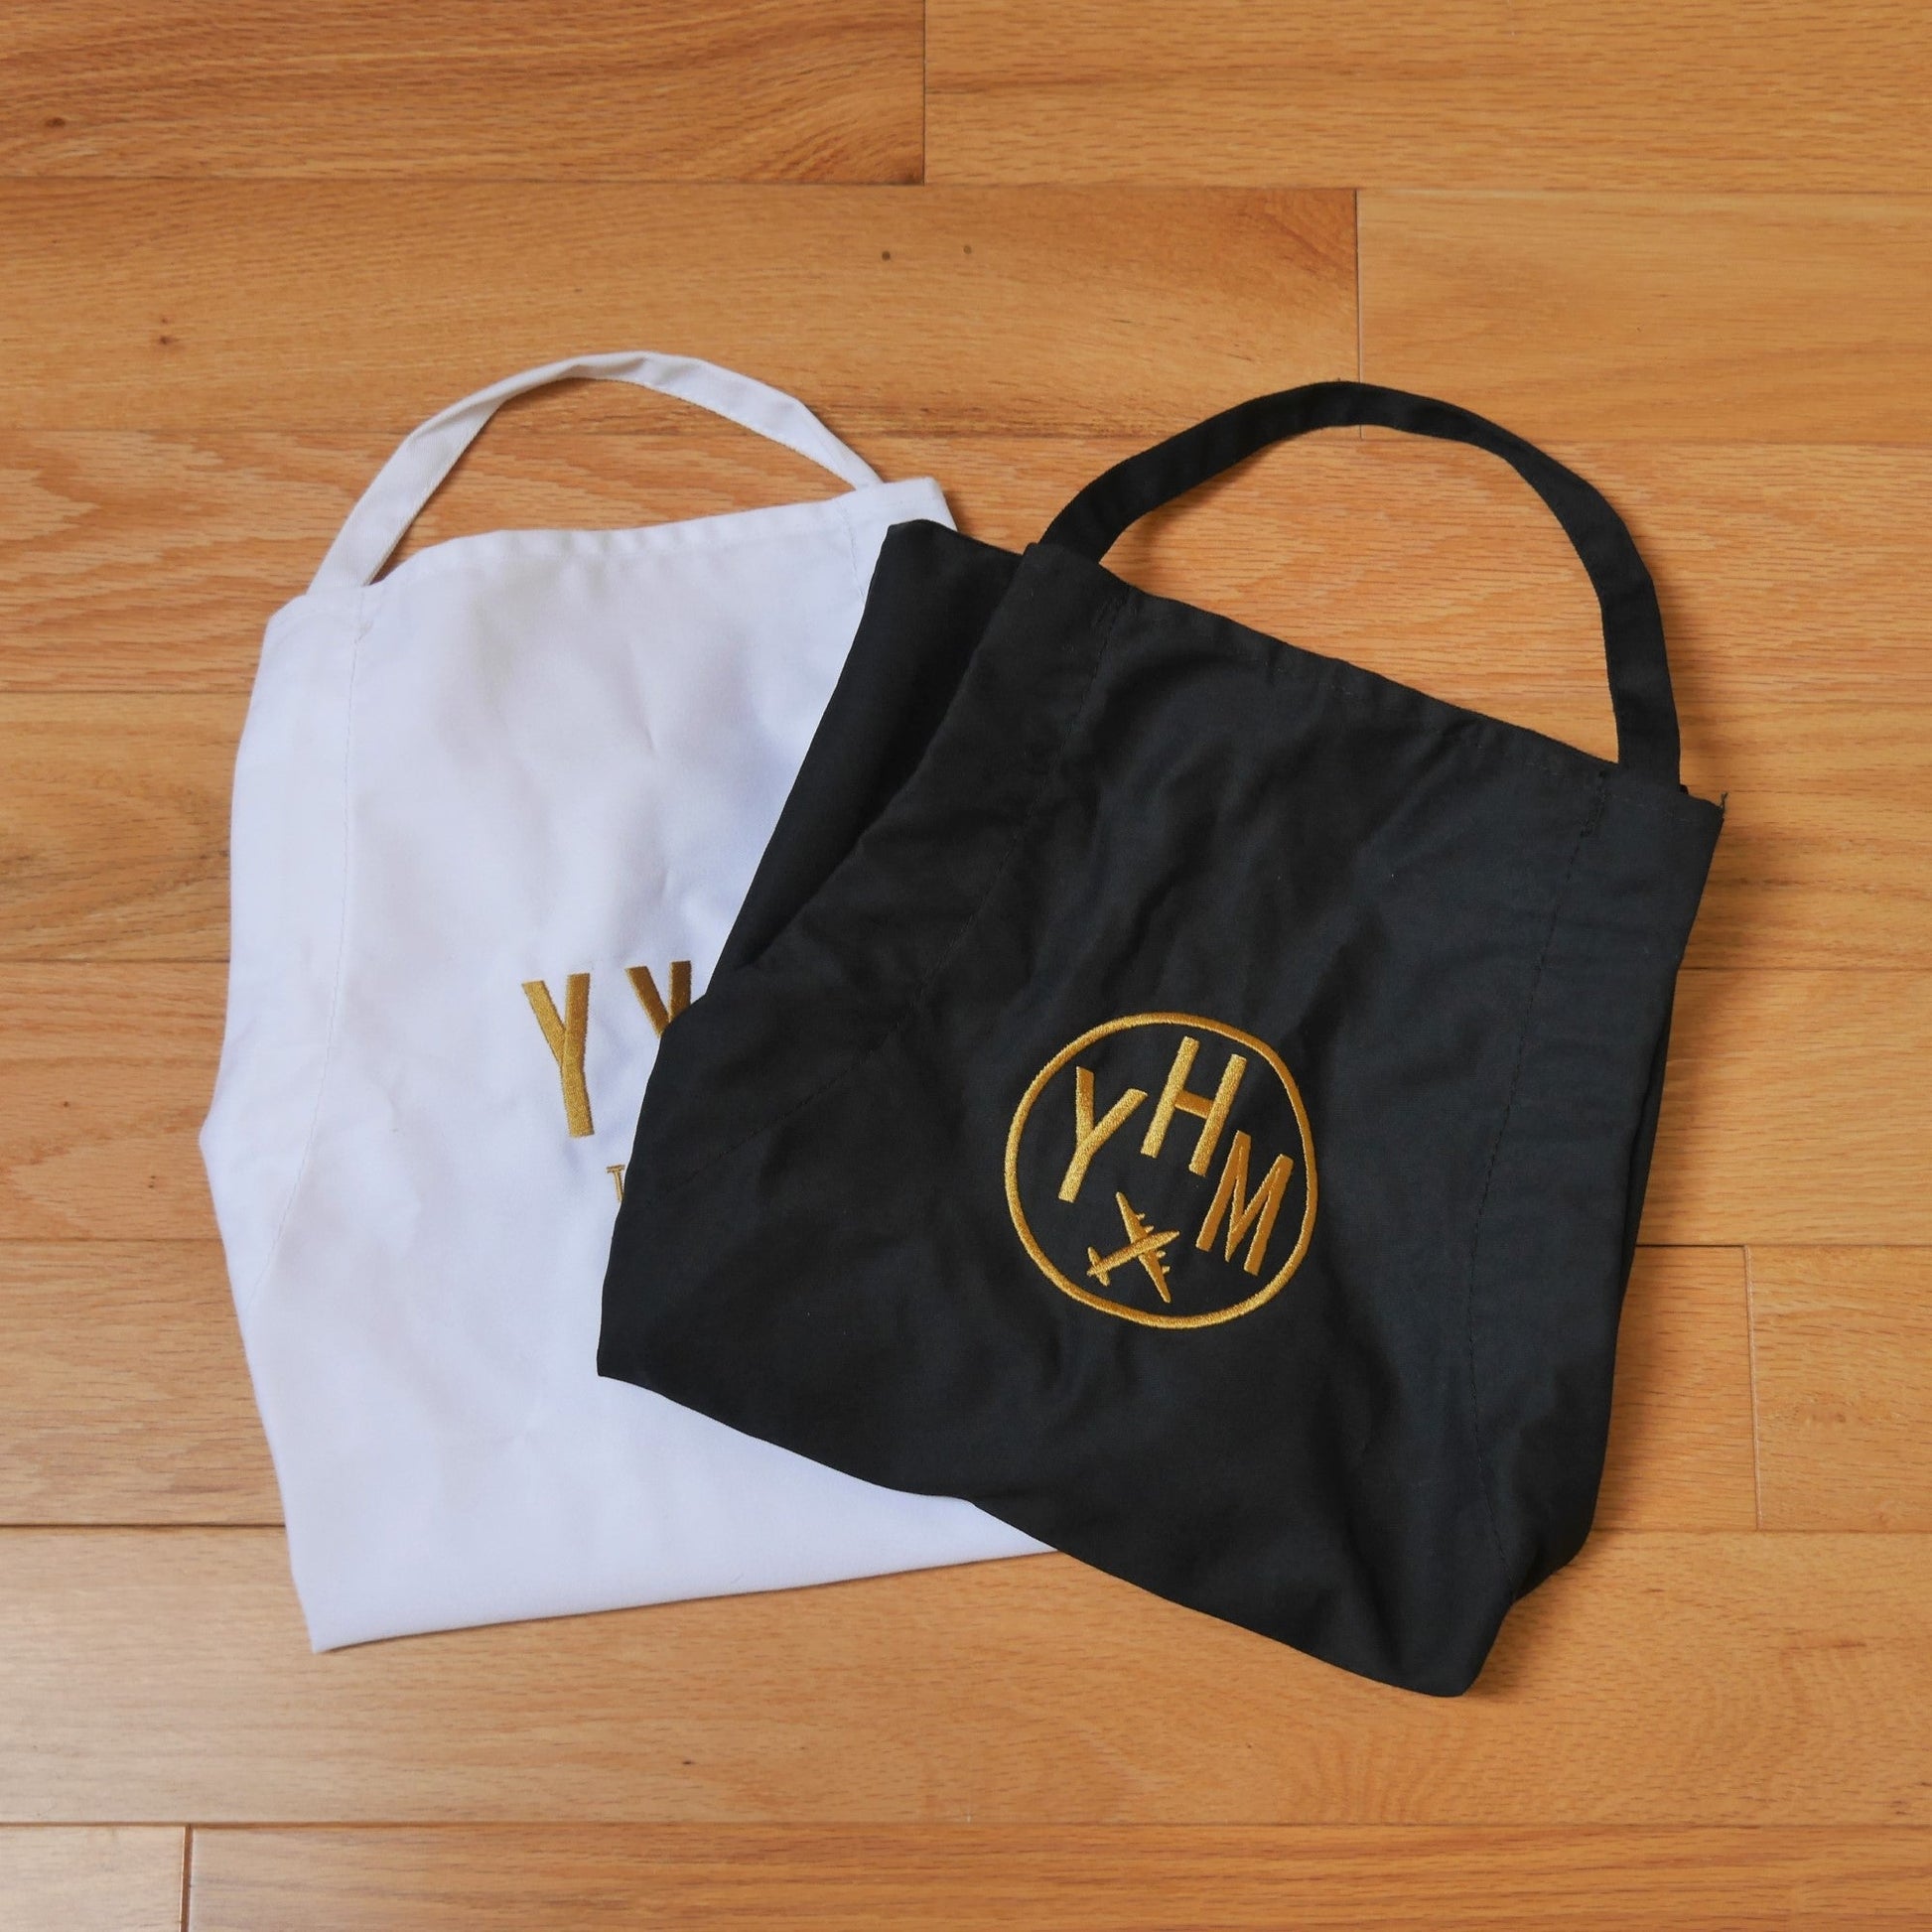 City Embroidered Apron - Old Gold • BER Berlin • YHM Designs - Image 14